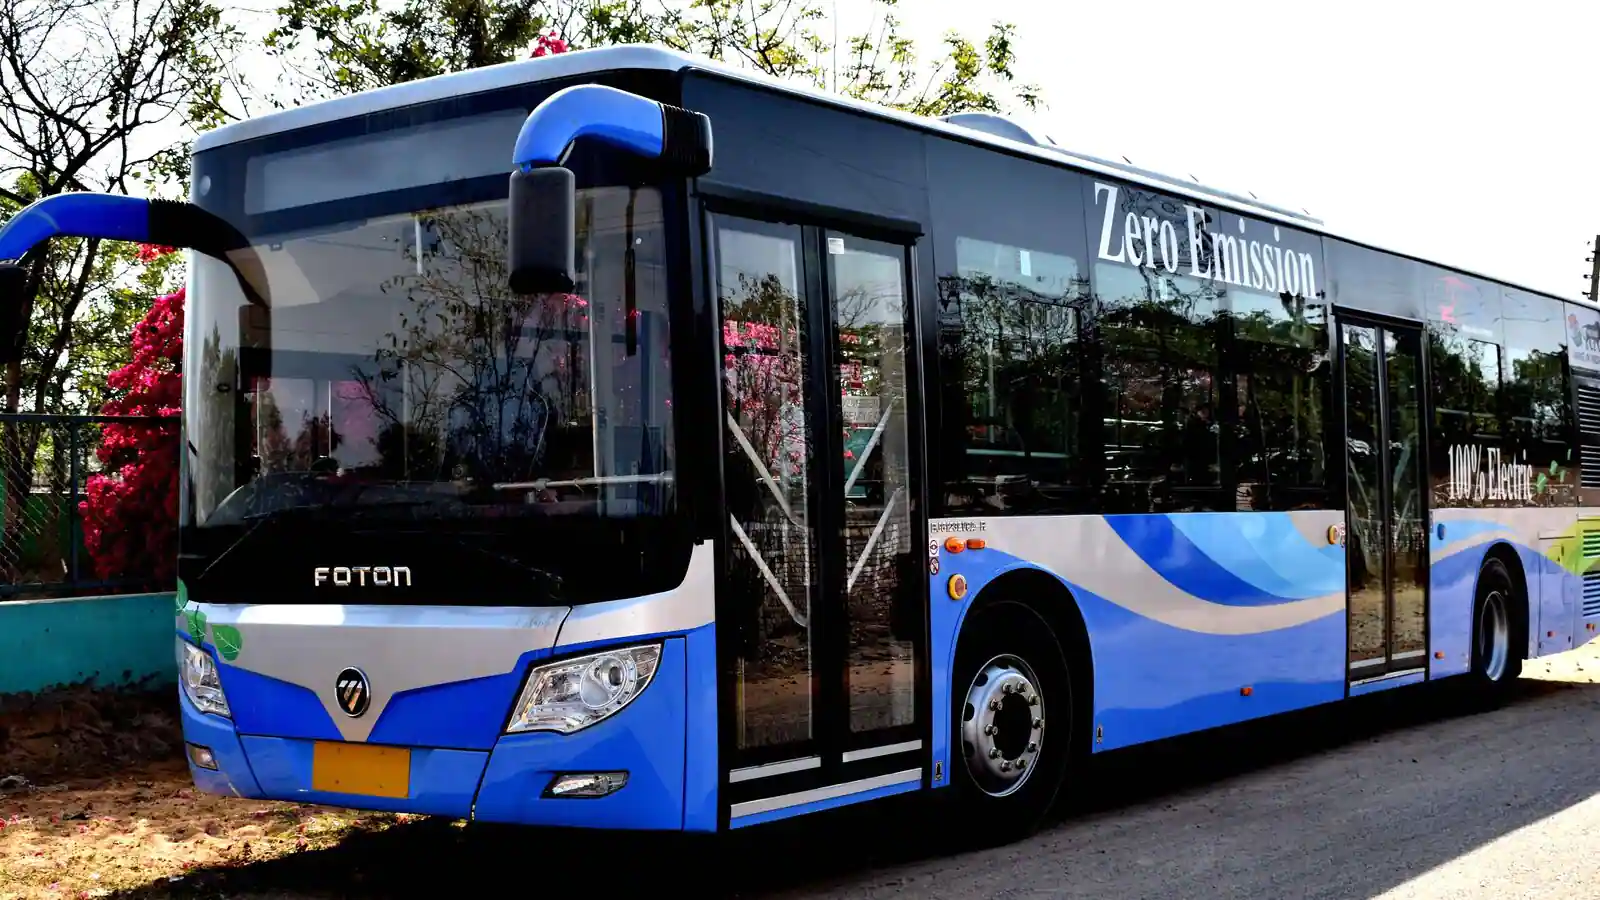 https://e-vehicleinfo.com/top-5-best-electric-buses-in-india-2023/